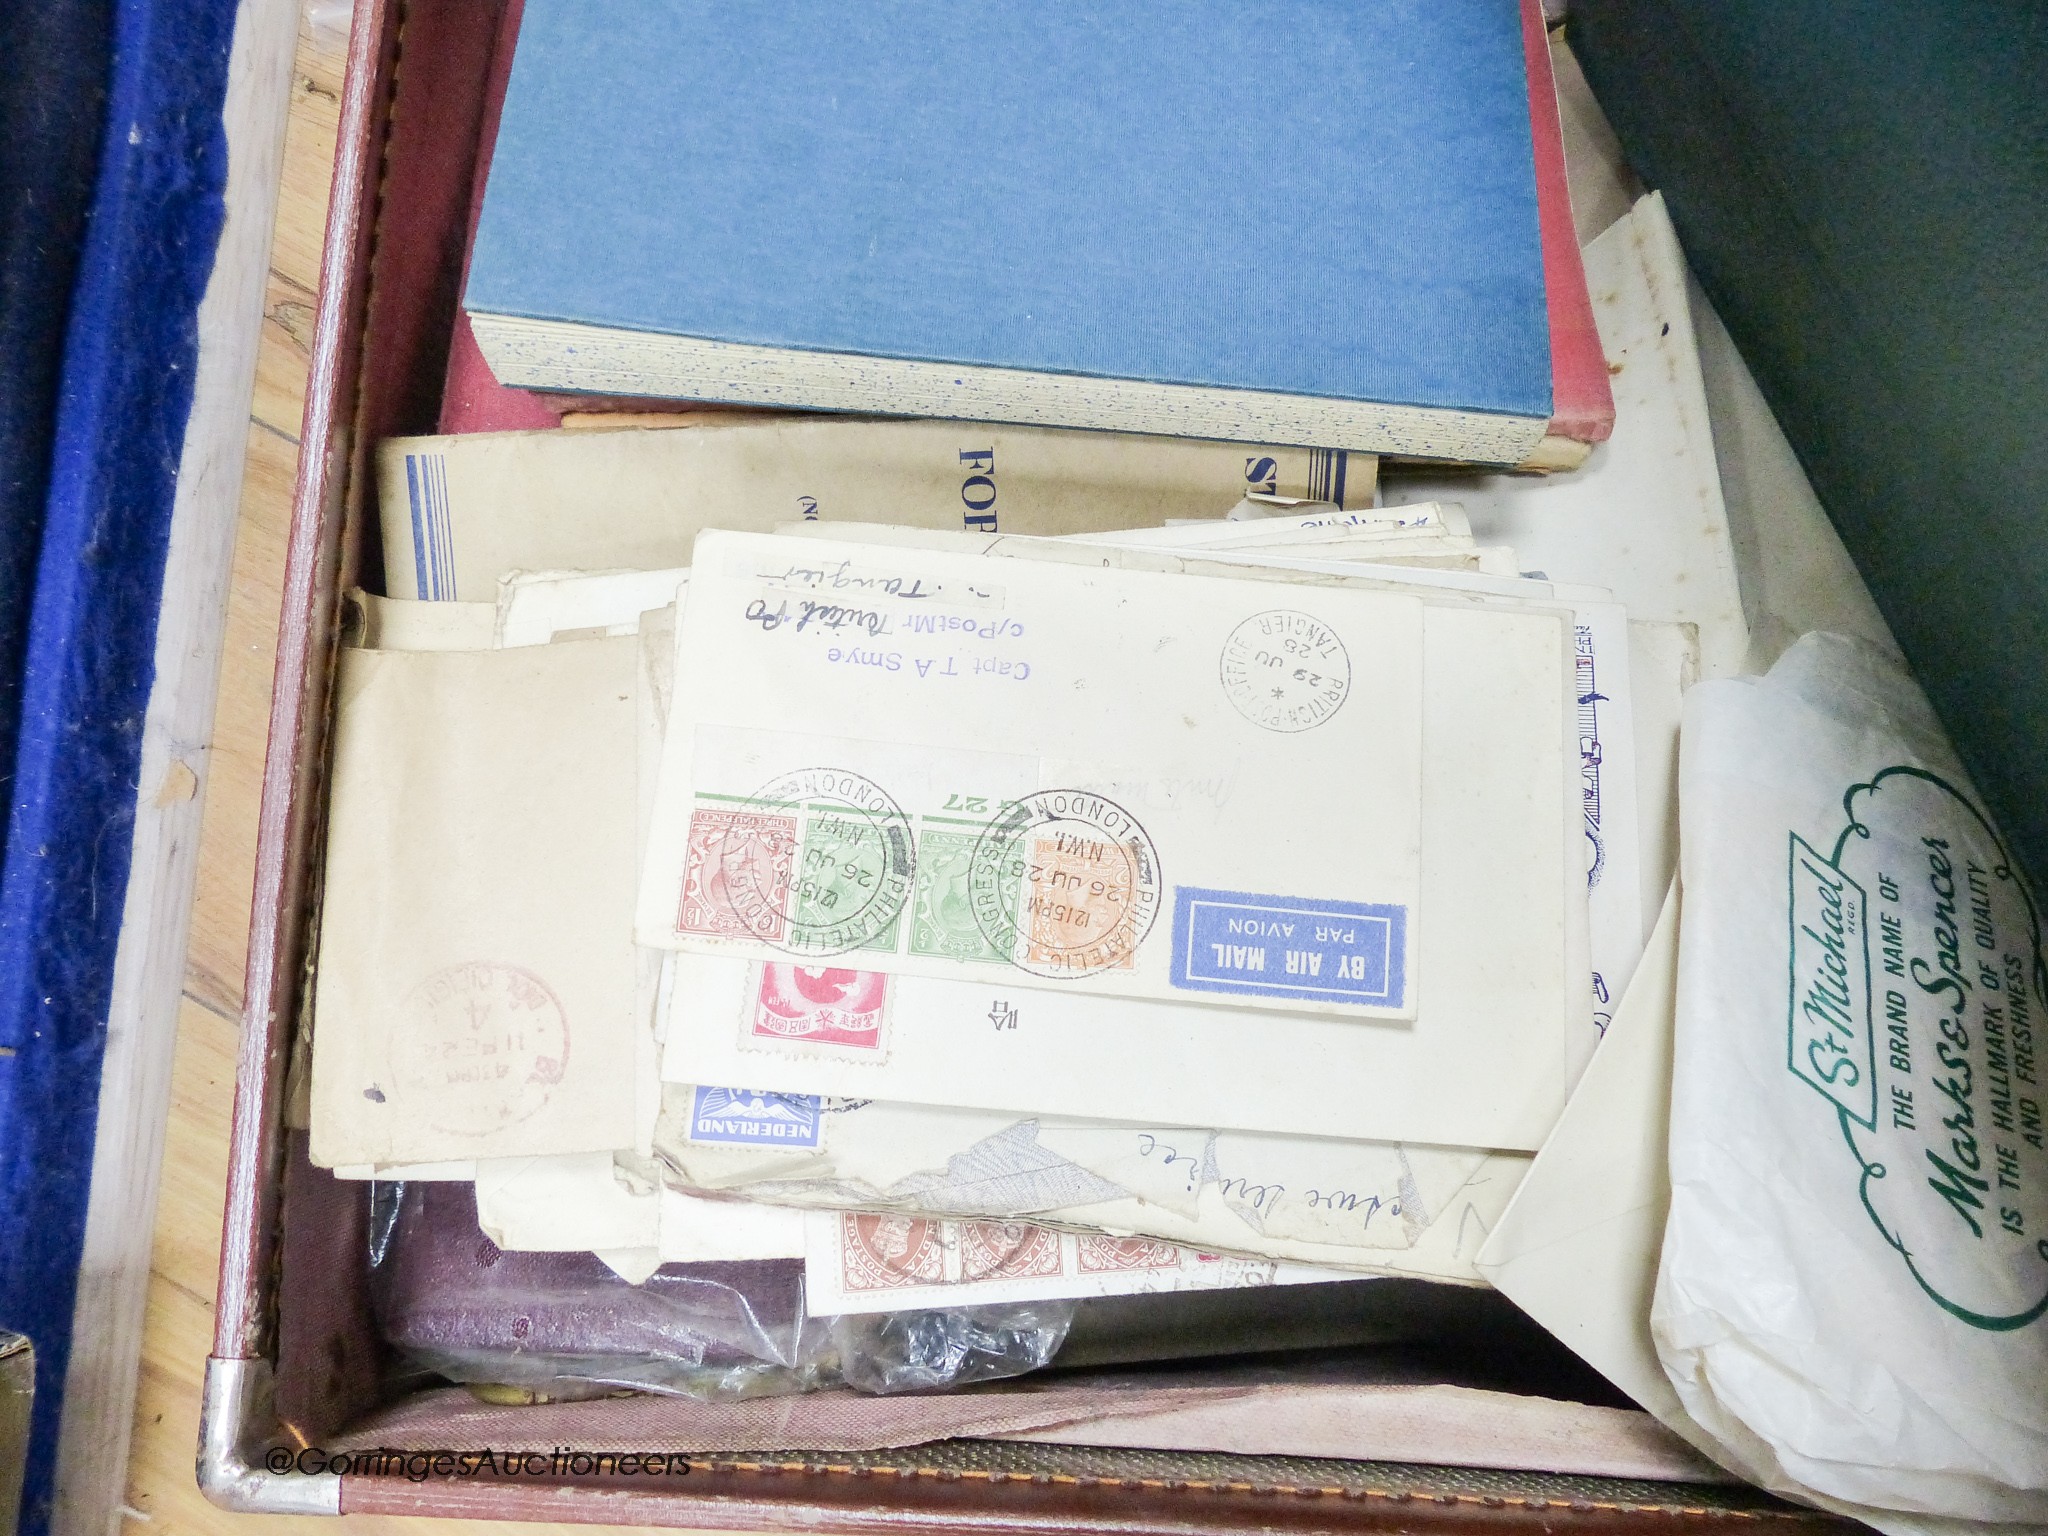 A suitcase of mostly early world stamps in albums packets with a 1937 coronation, 1945 victory album leaves, loose packets, some postal covers (affected by damp)